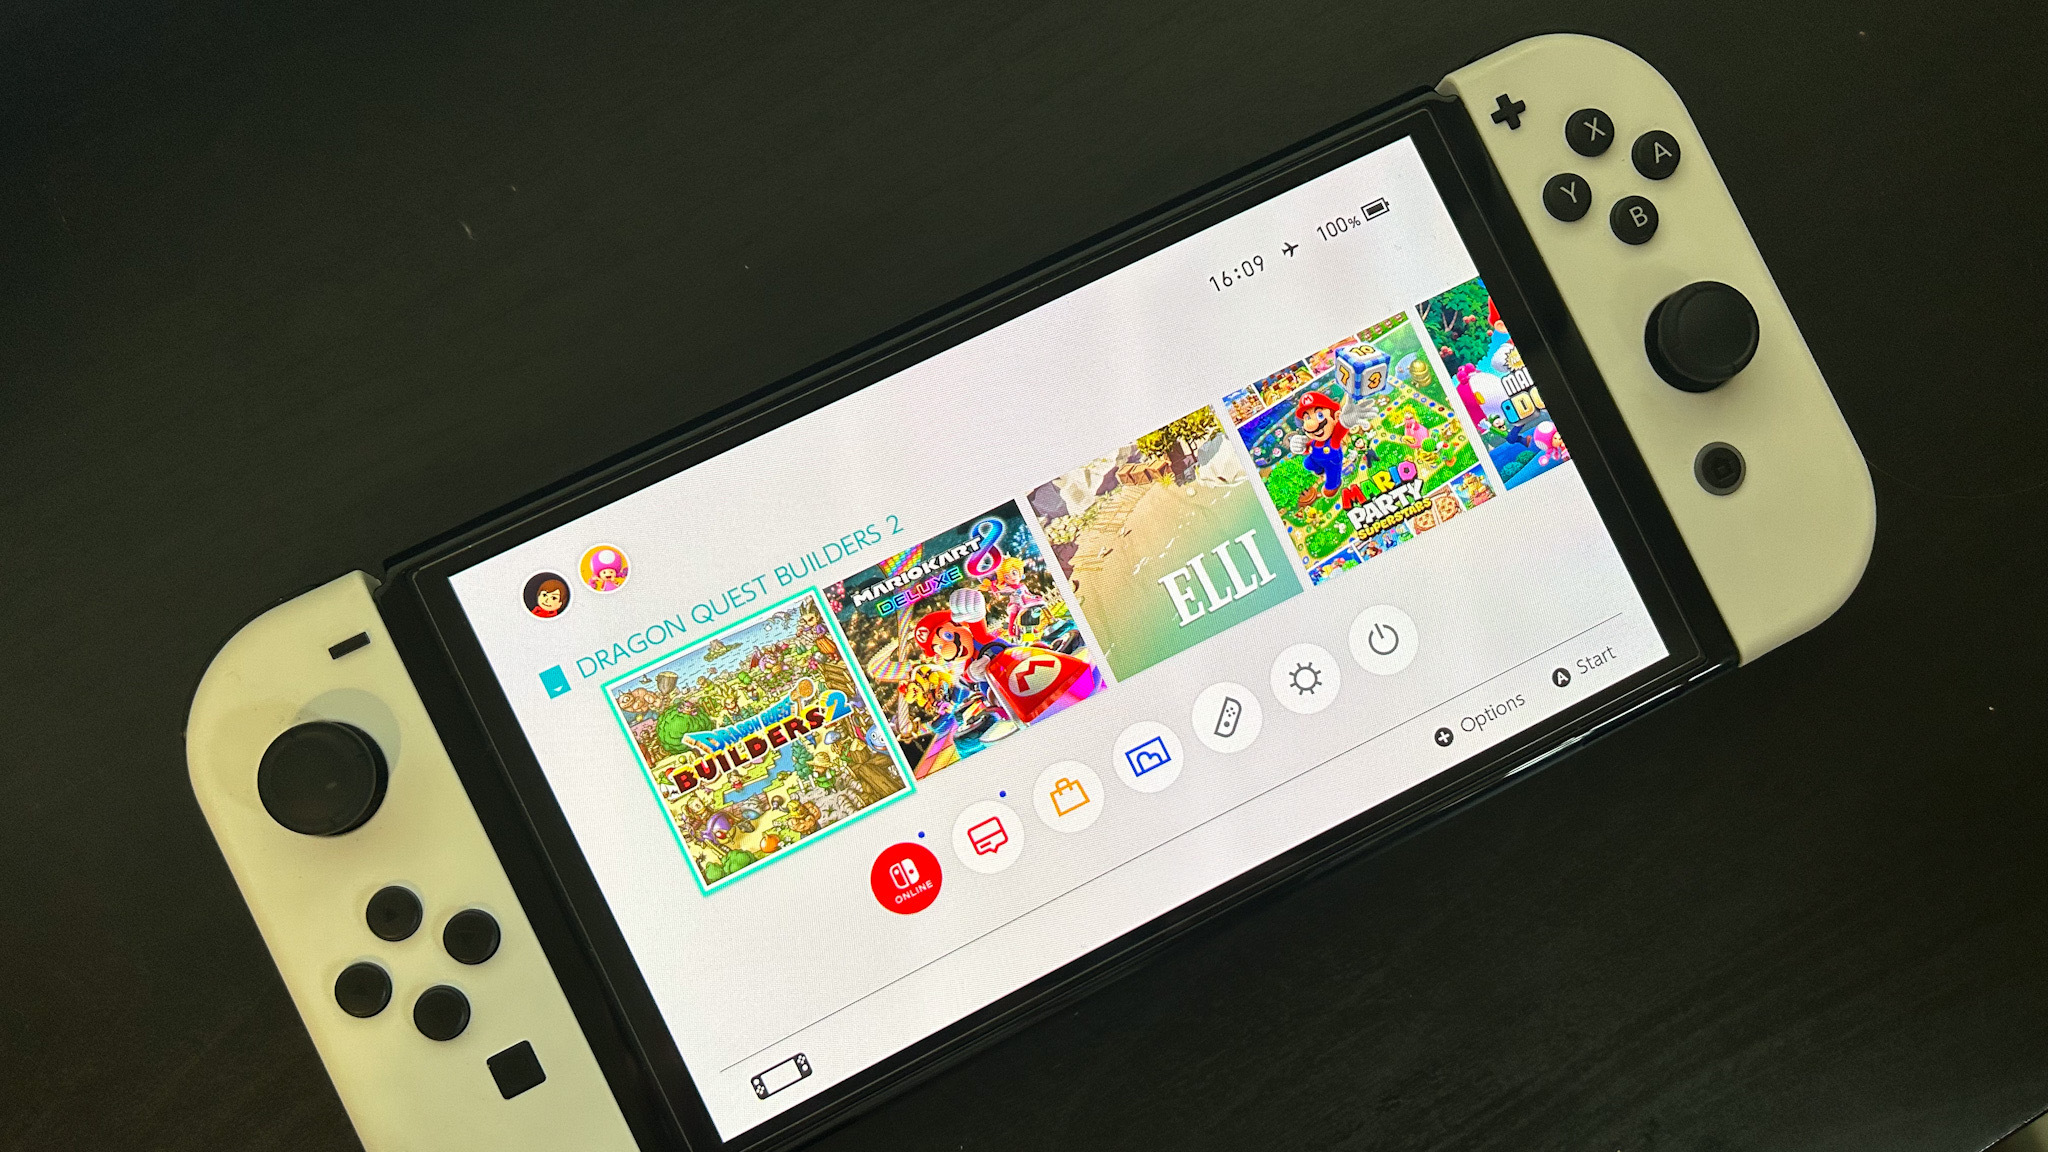 Nintendo Switch 2 release date - More signs point towards imminent